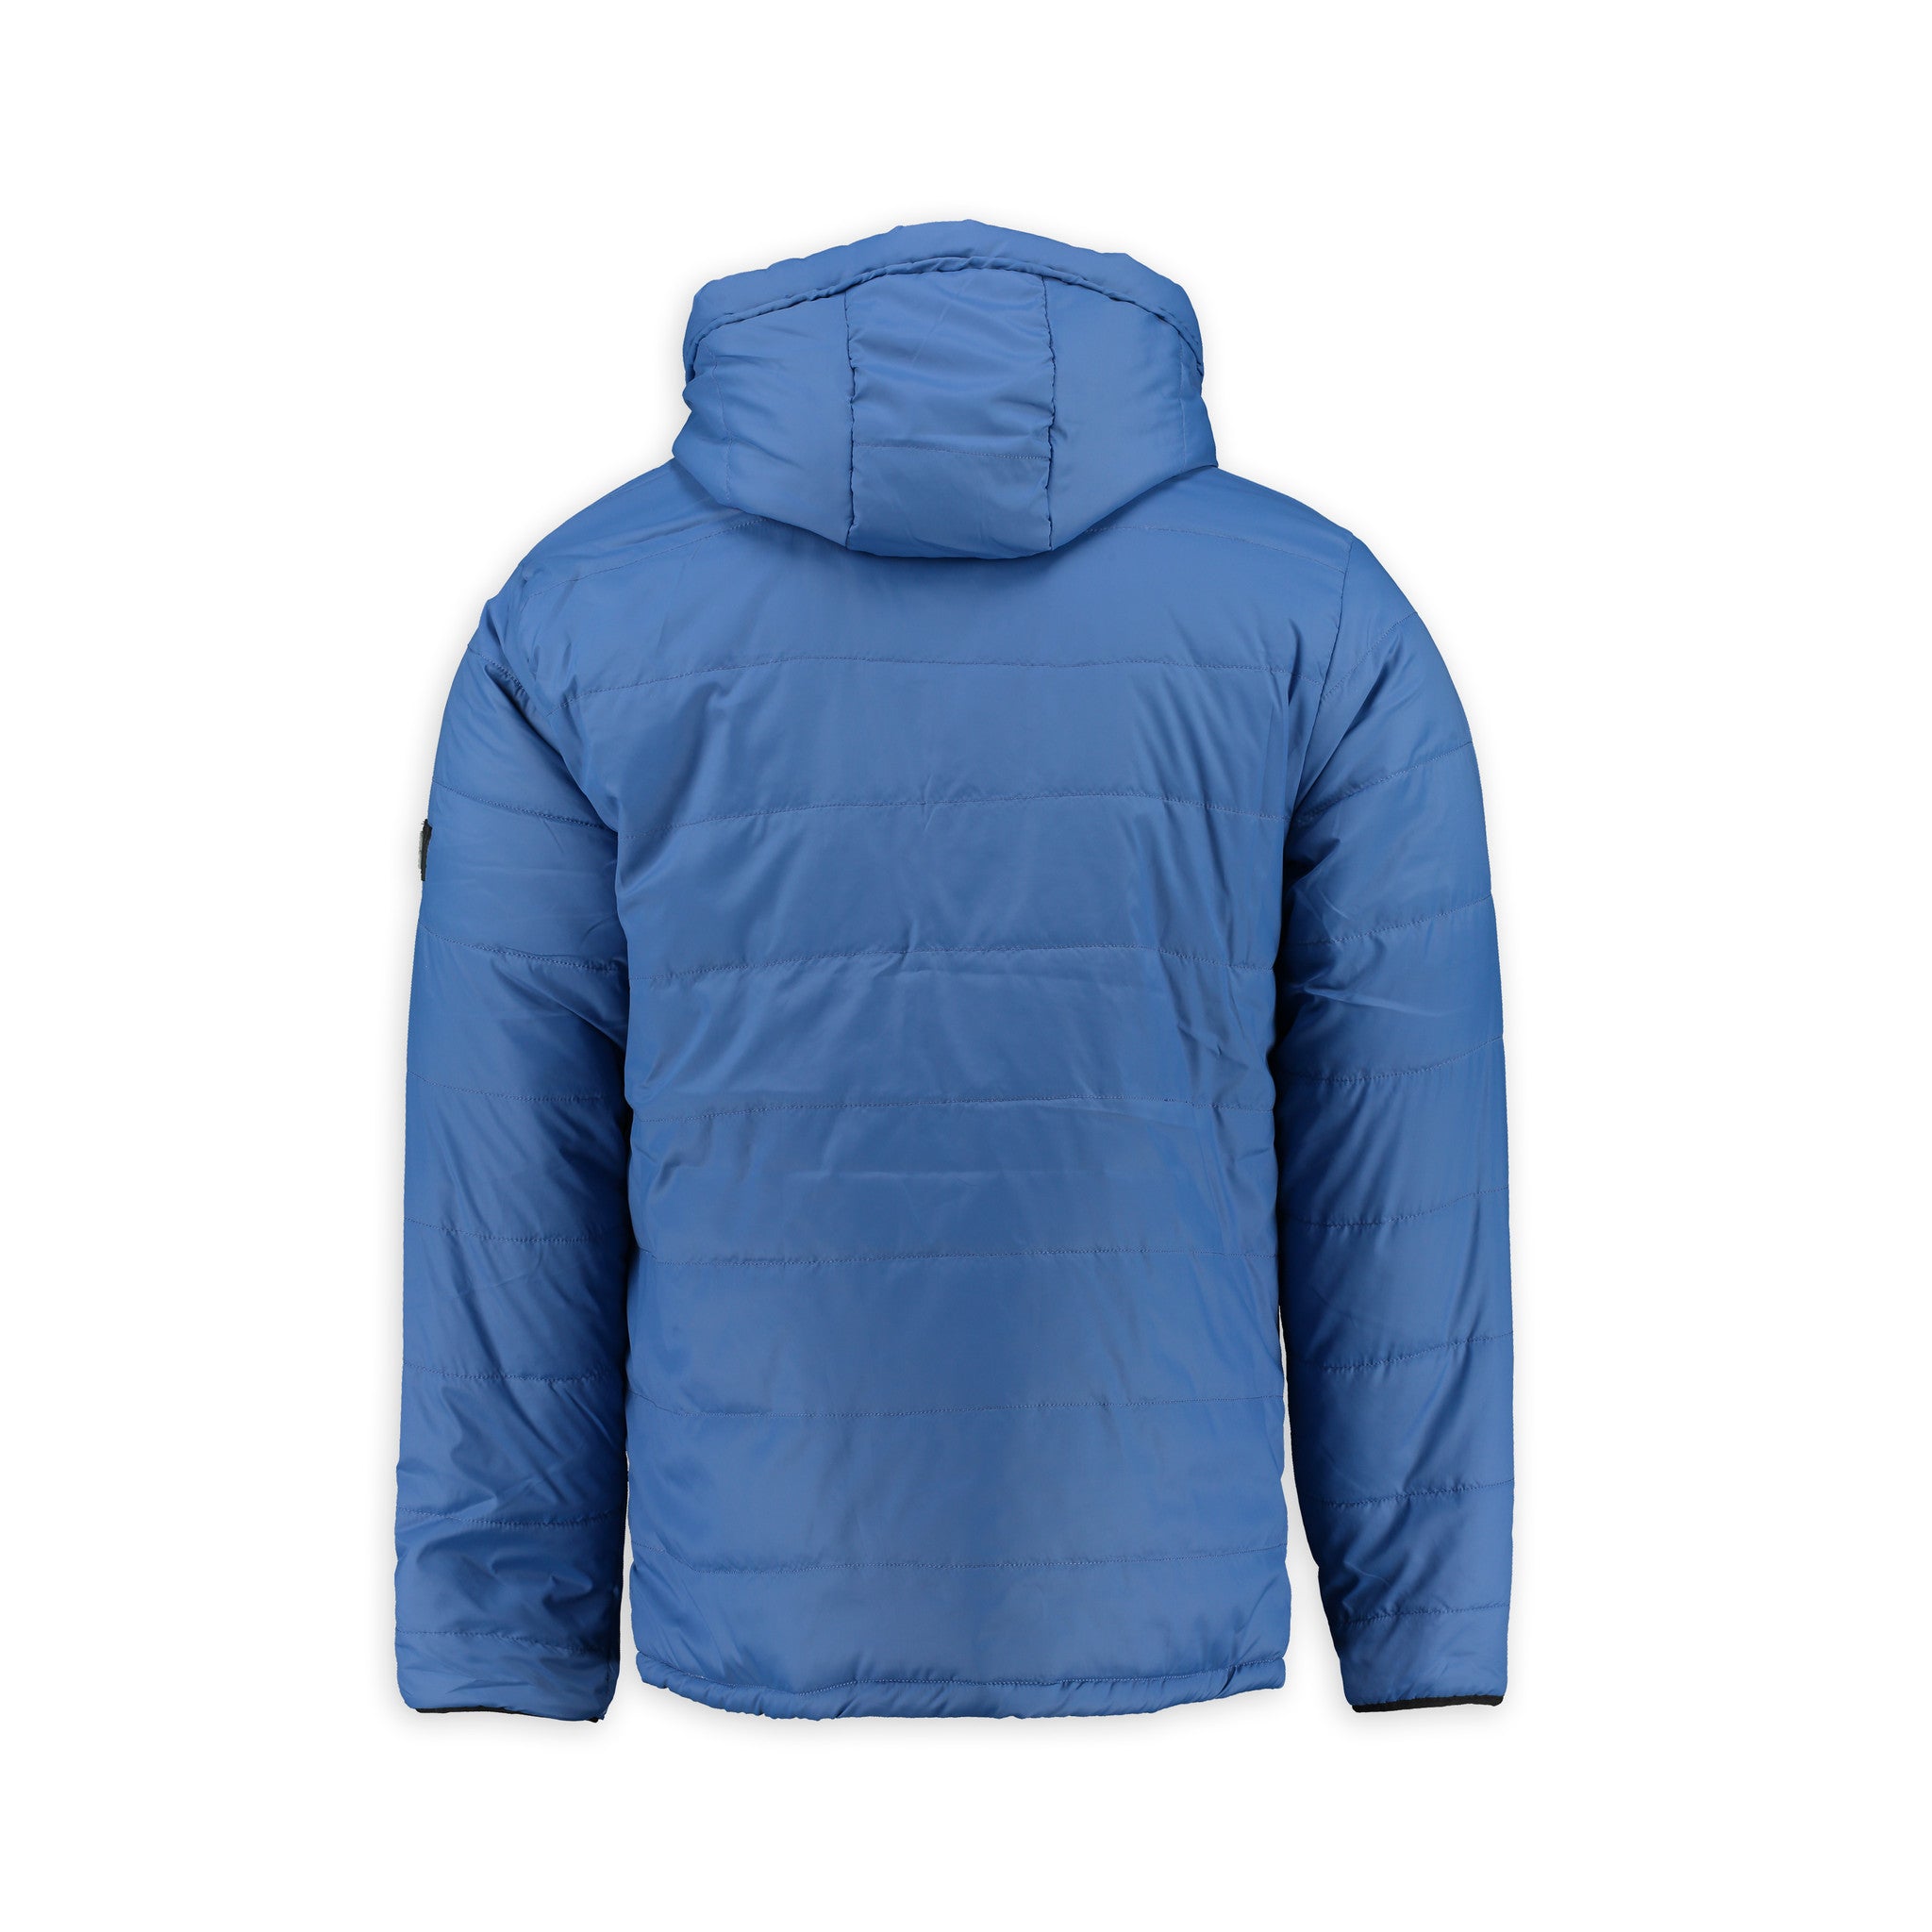 Aspact Expedition Jacket Blauw